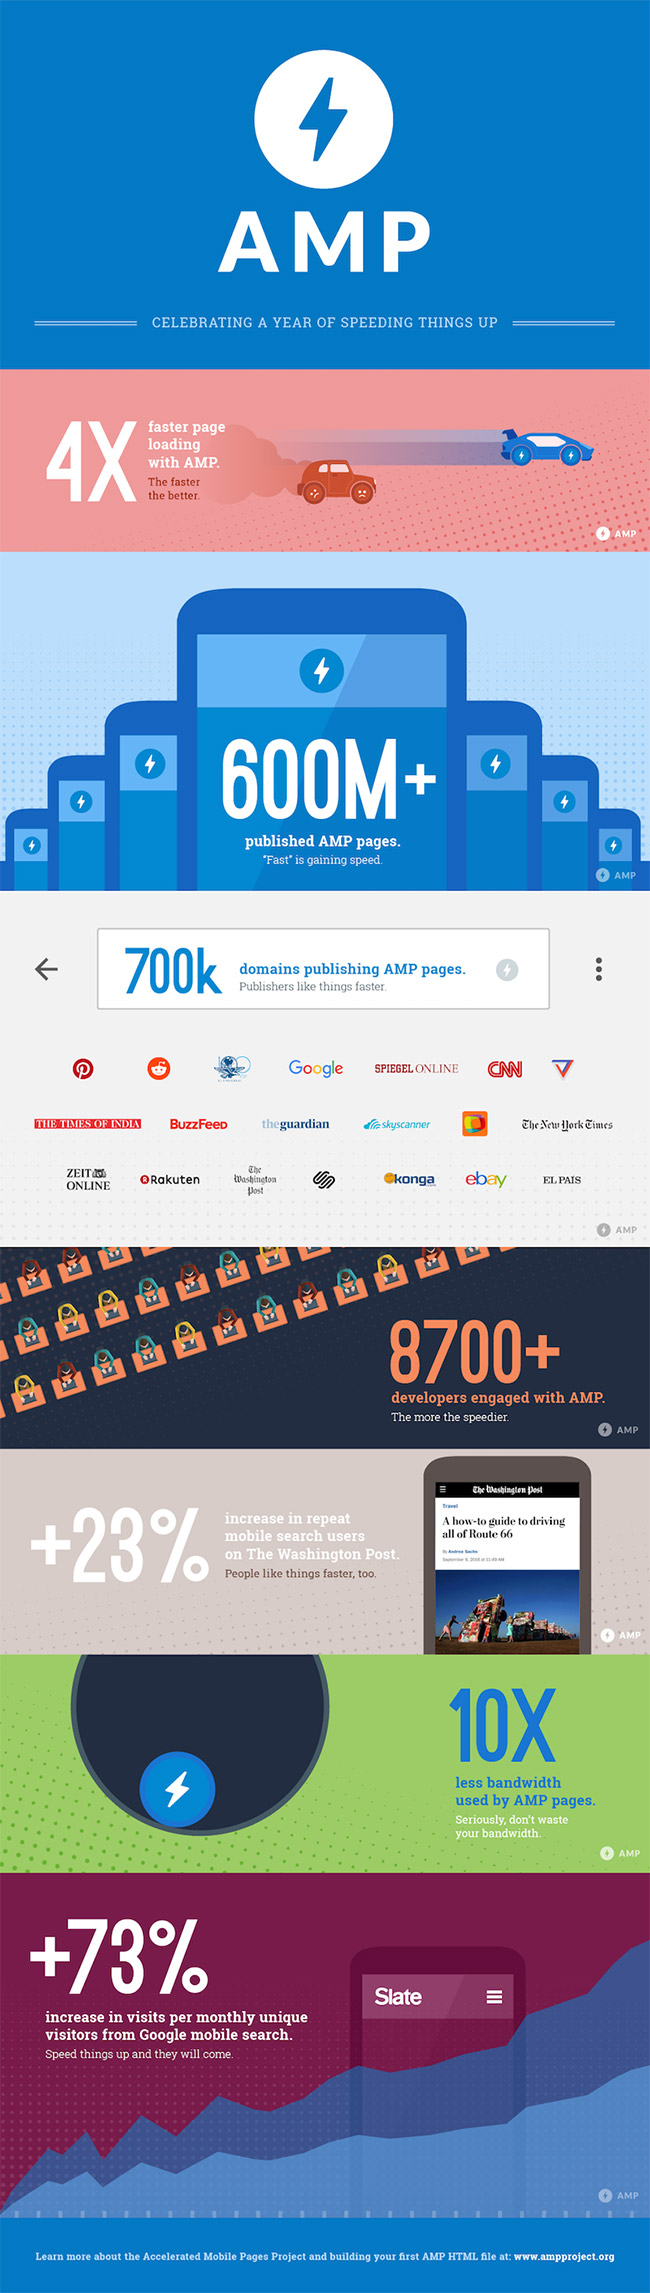 Accelerated Mobile Pages(AMP): One Year On